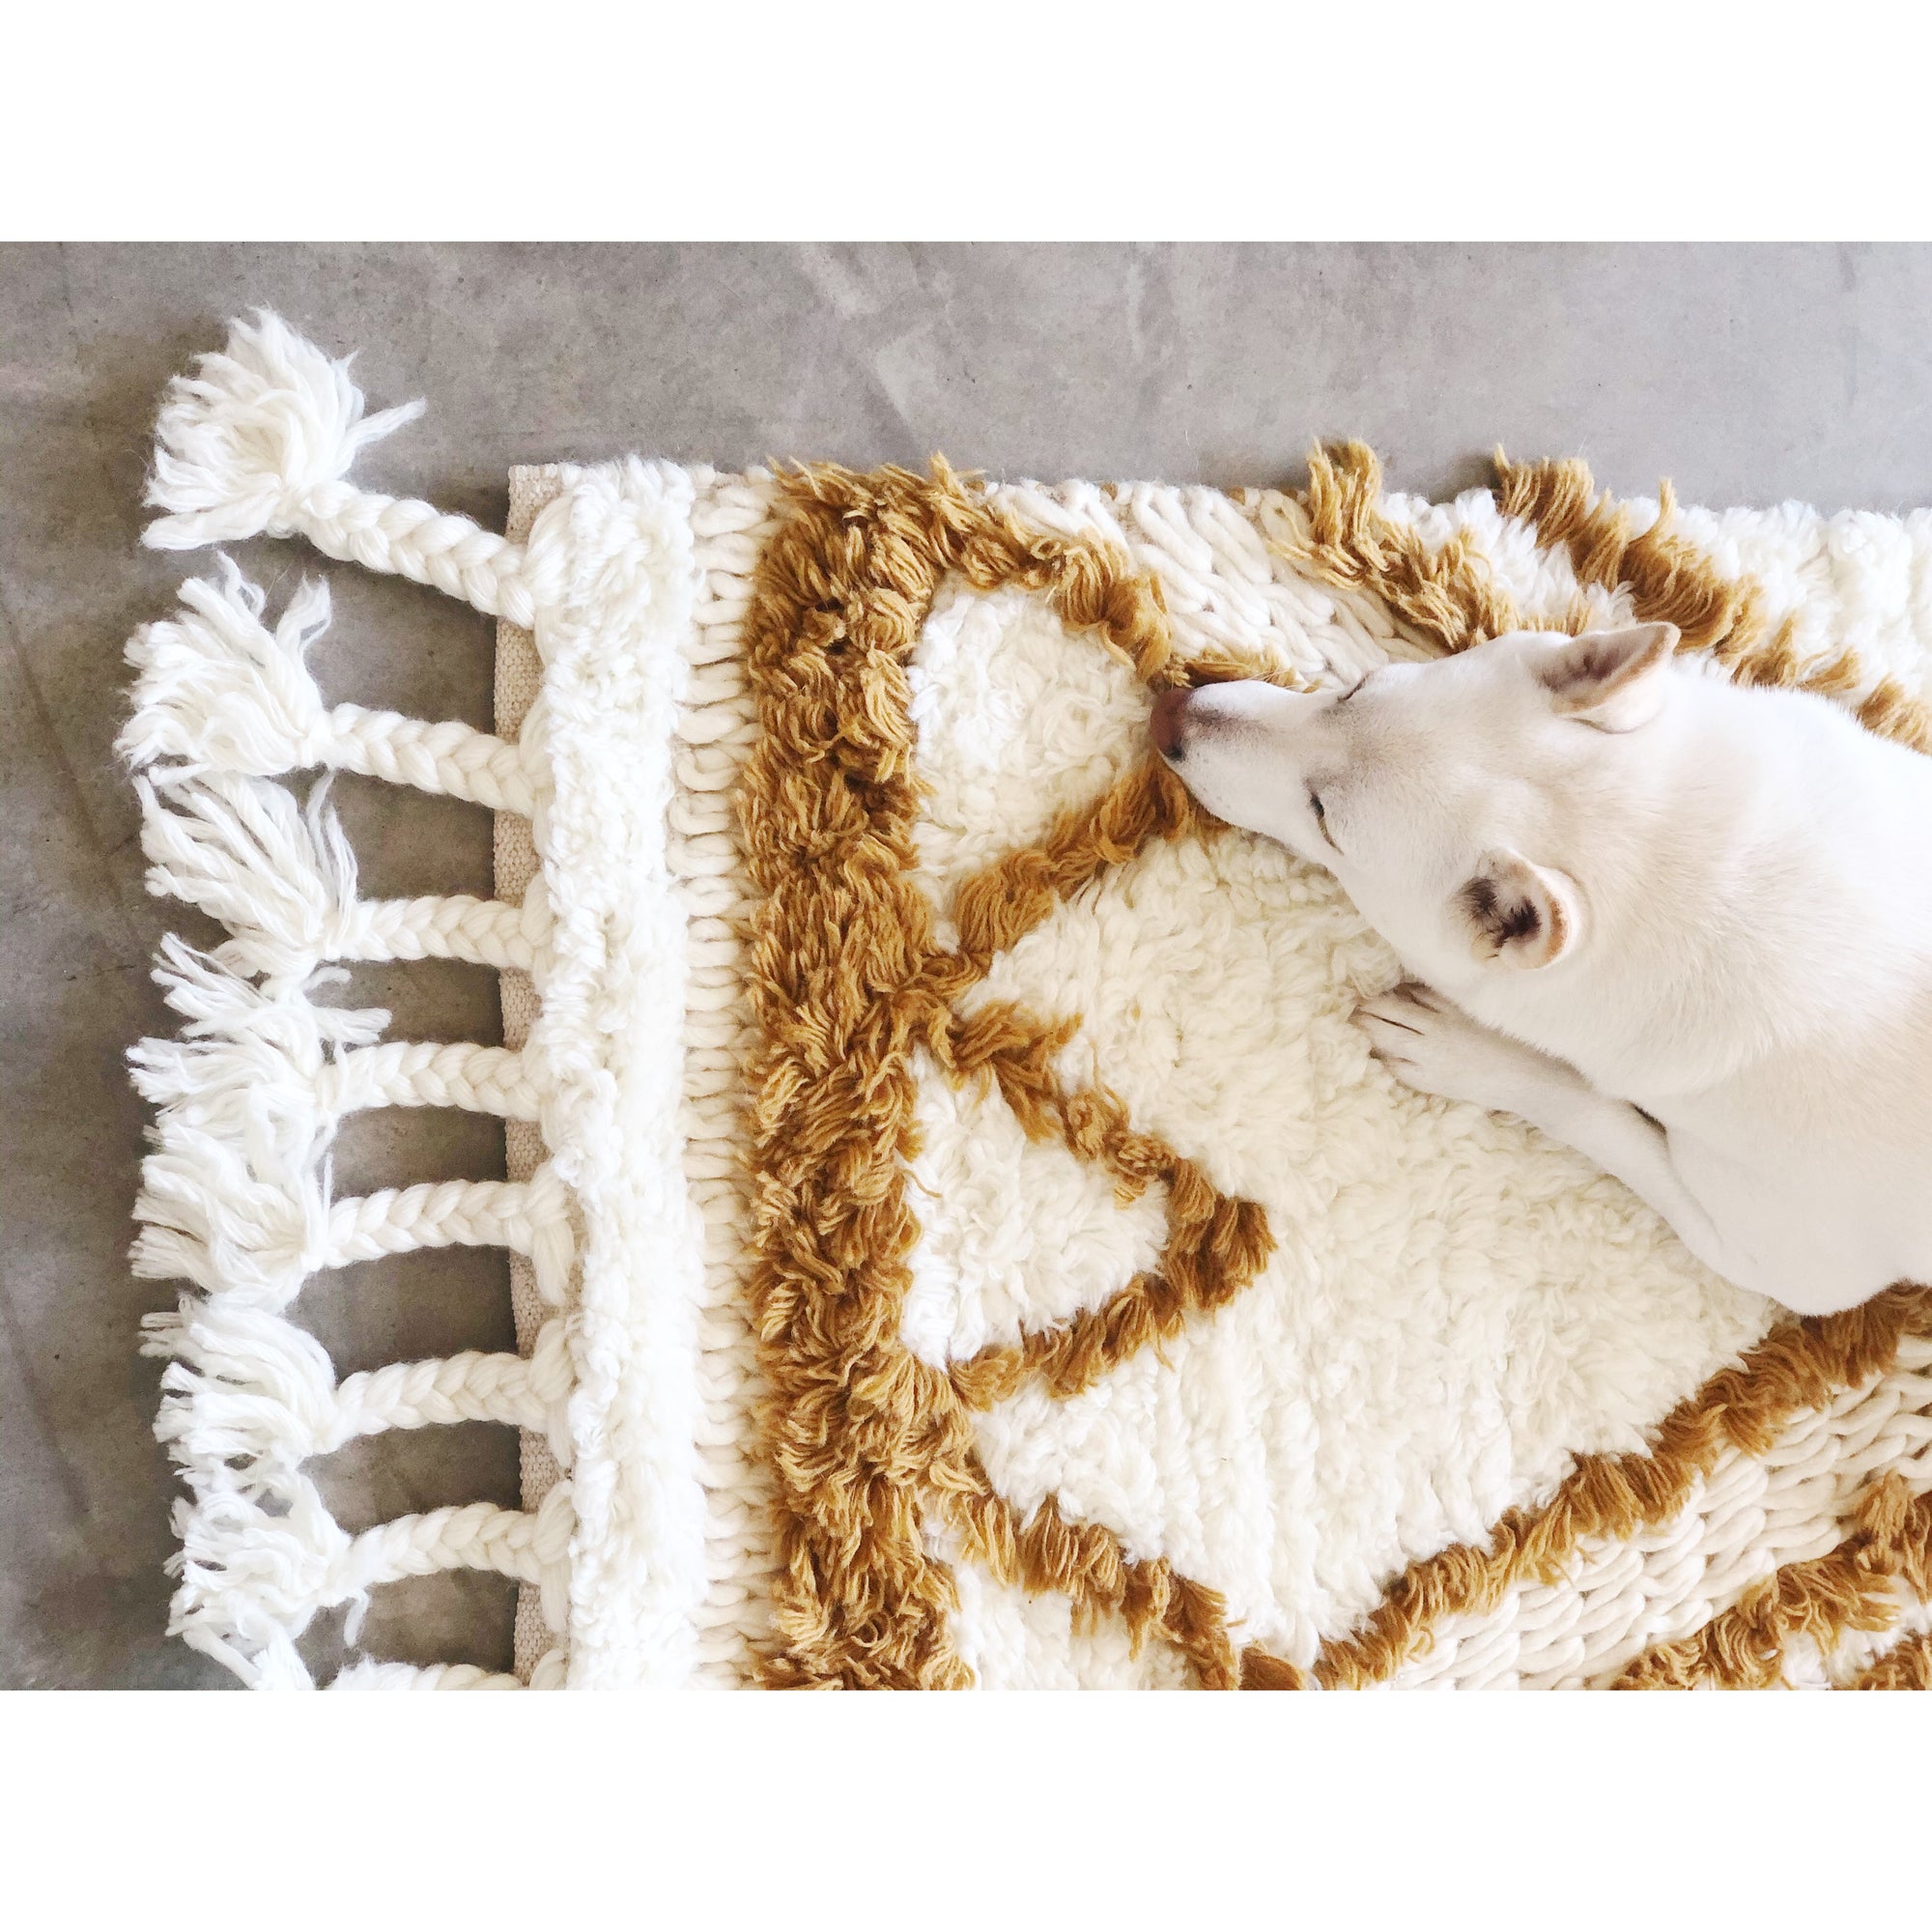 The Chunky Accent Tufted Rug